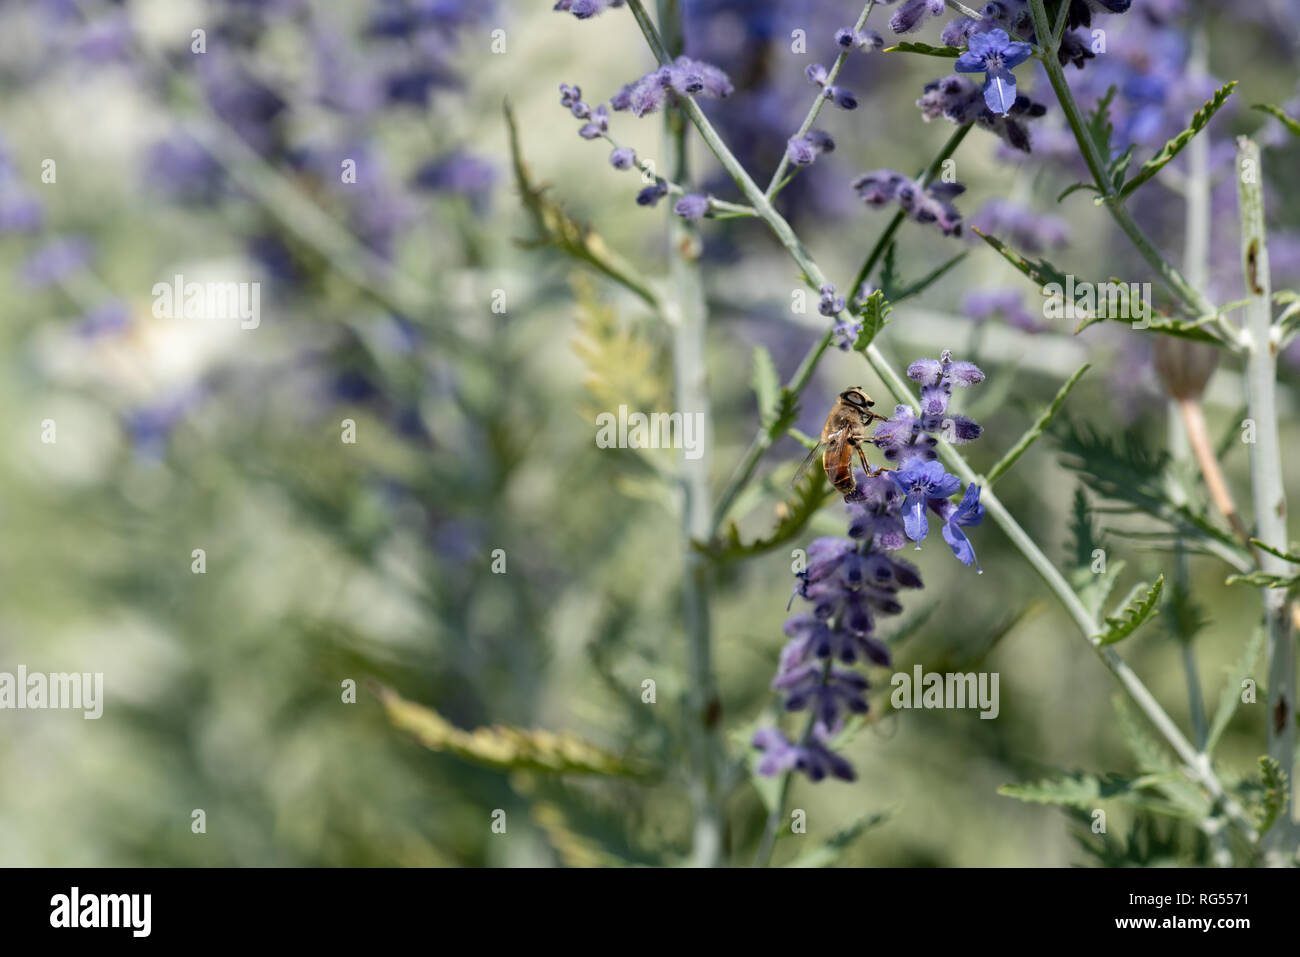 Color outdoor floral image of a perovskia / russian sage / blue spire blossom with a bee on it,natural blurred green background sunny  summer day Stock Photo